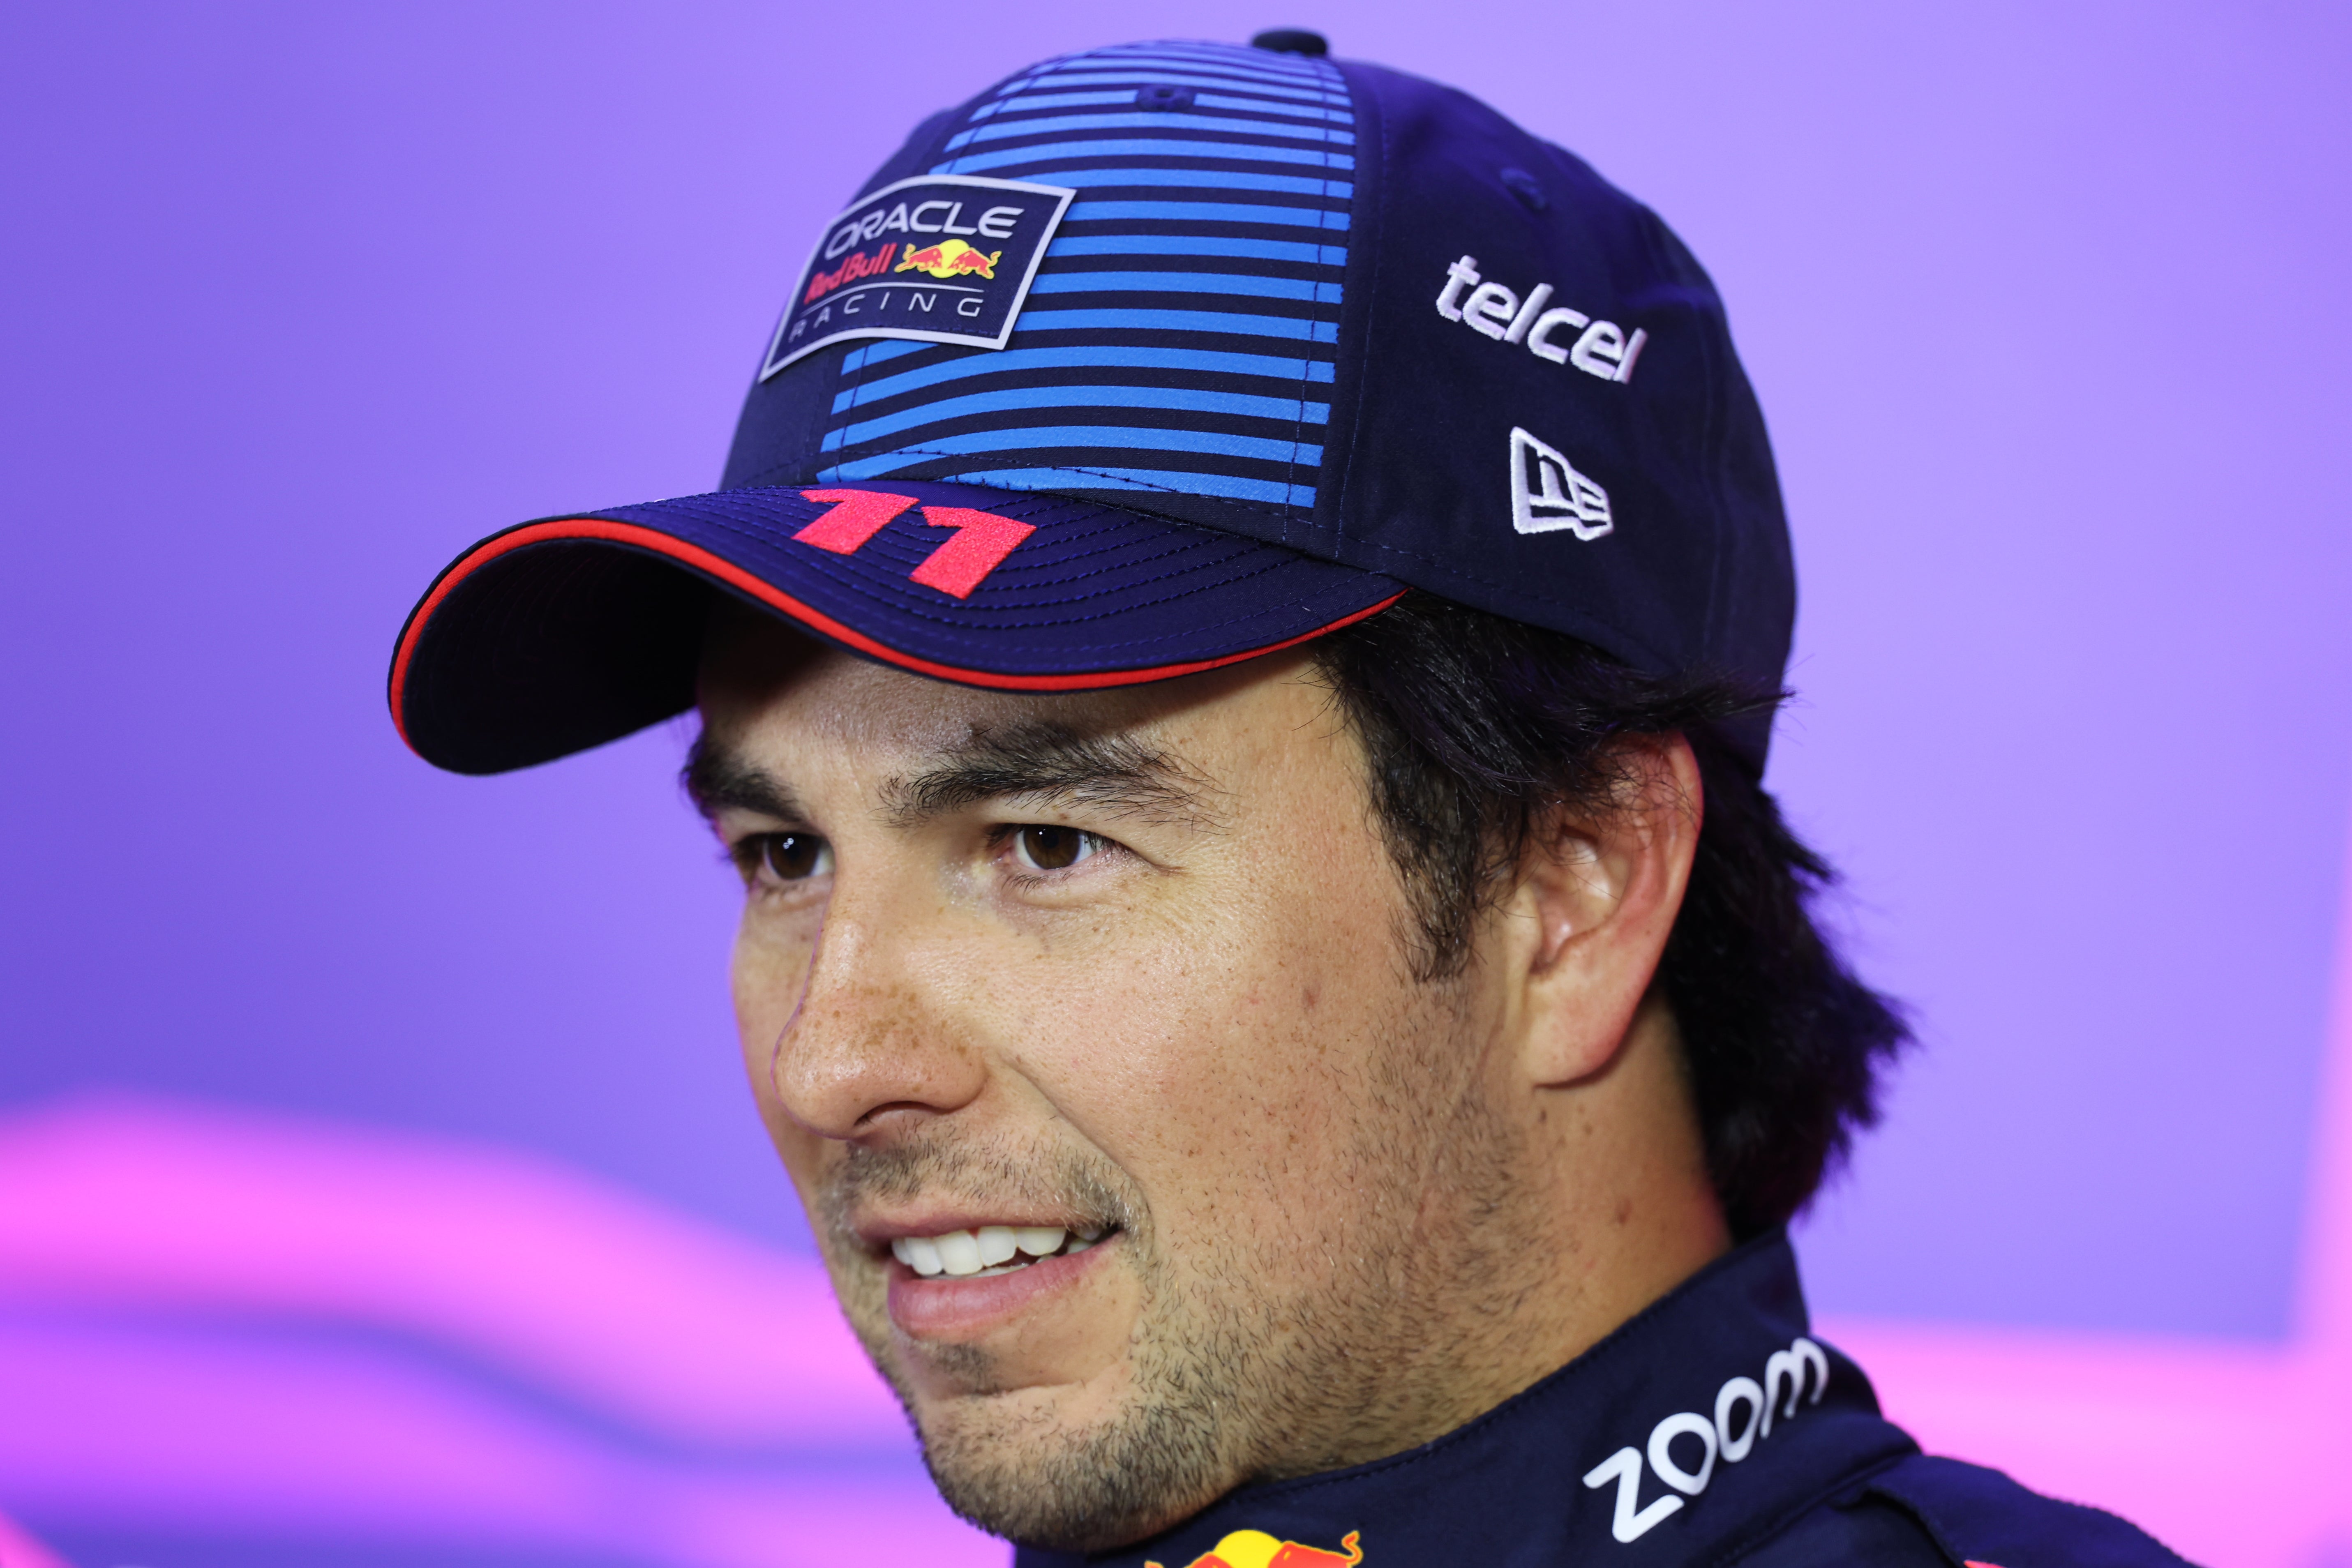 Sergio Perez has received a penalty for the Australian Grand Prix